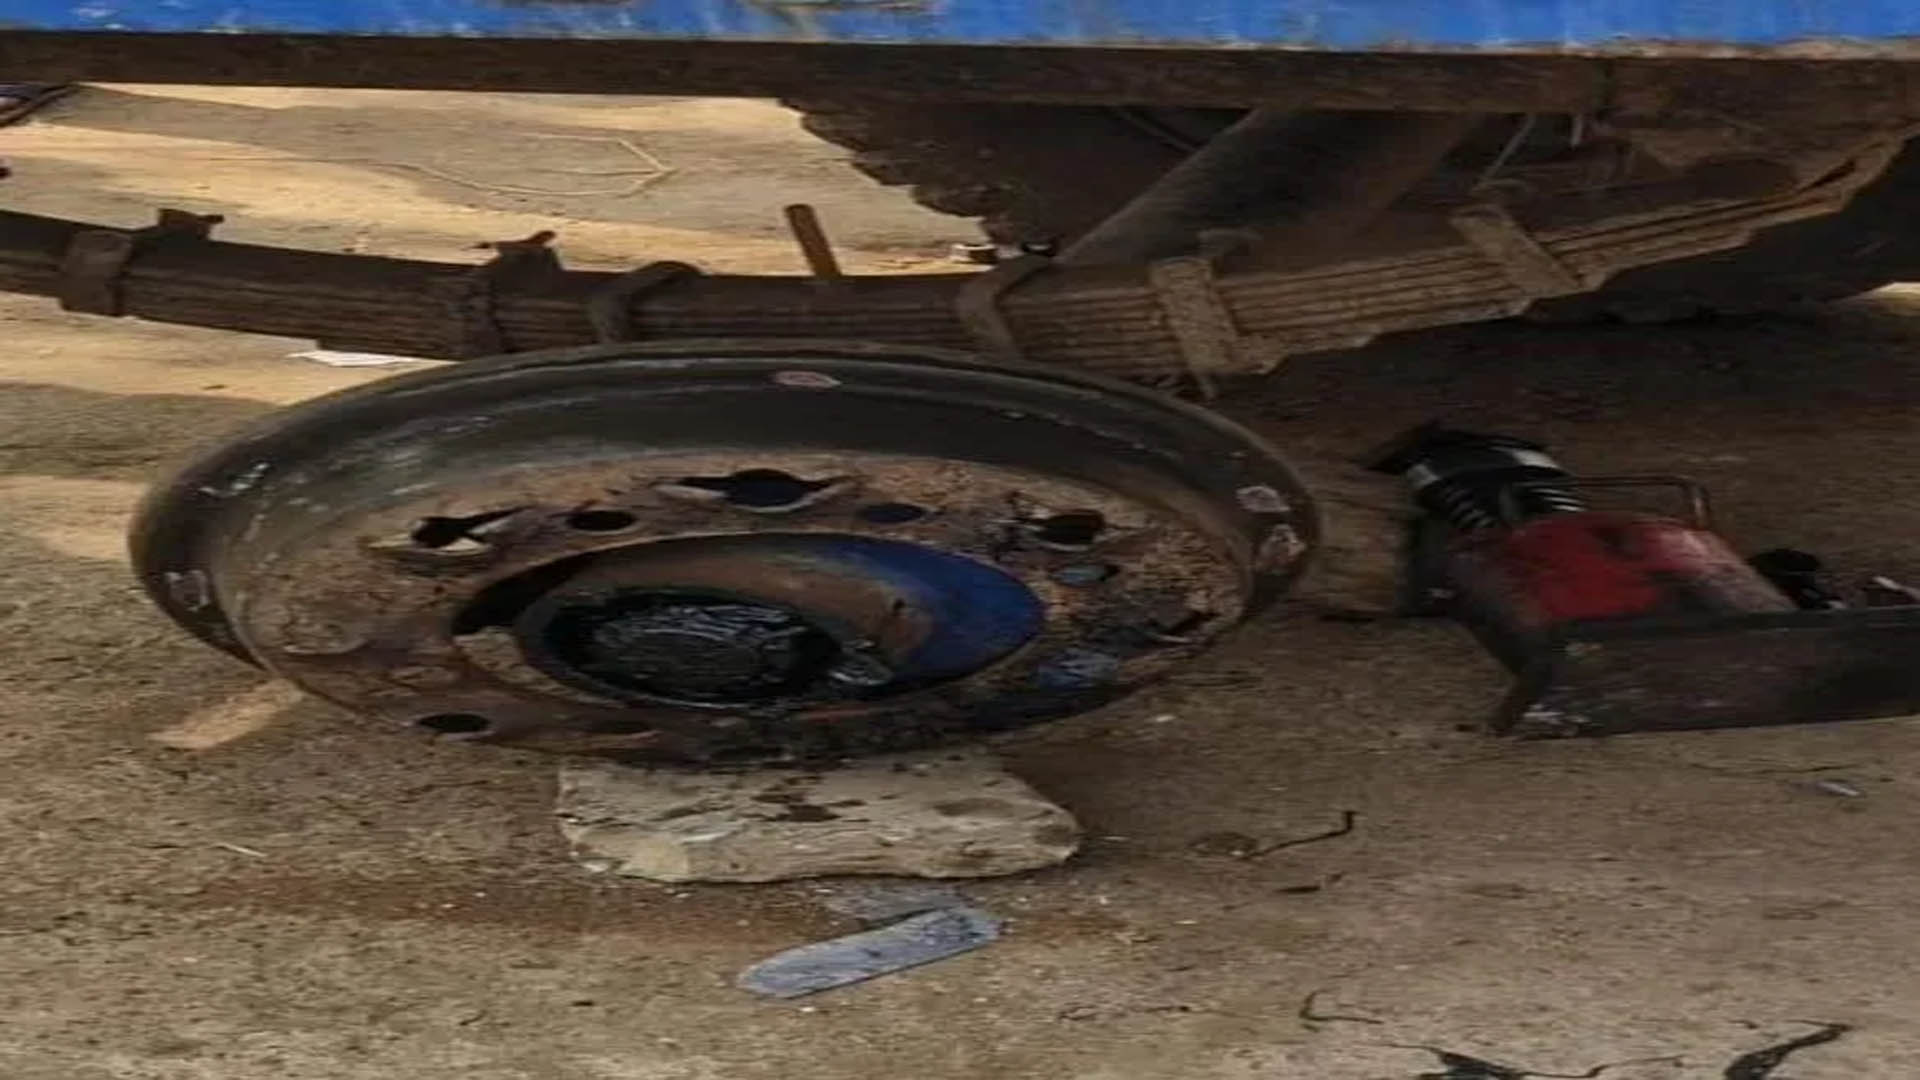 Death due to tire burst, youth jumped several feet high